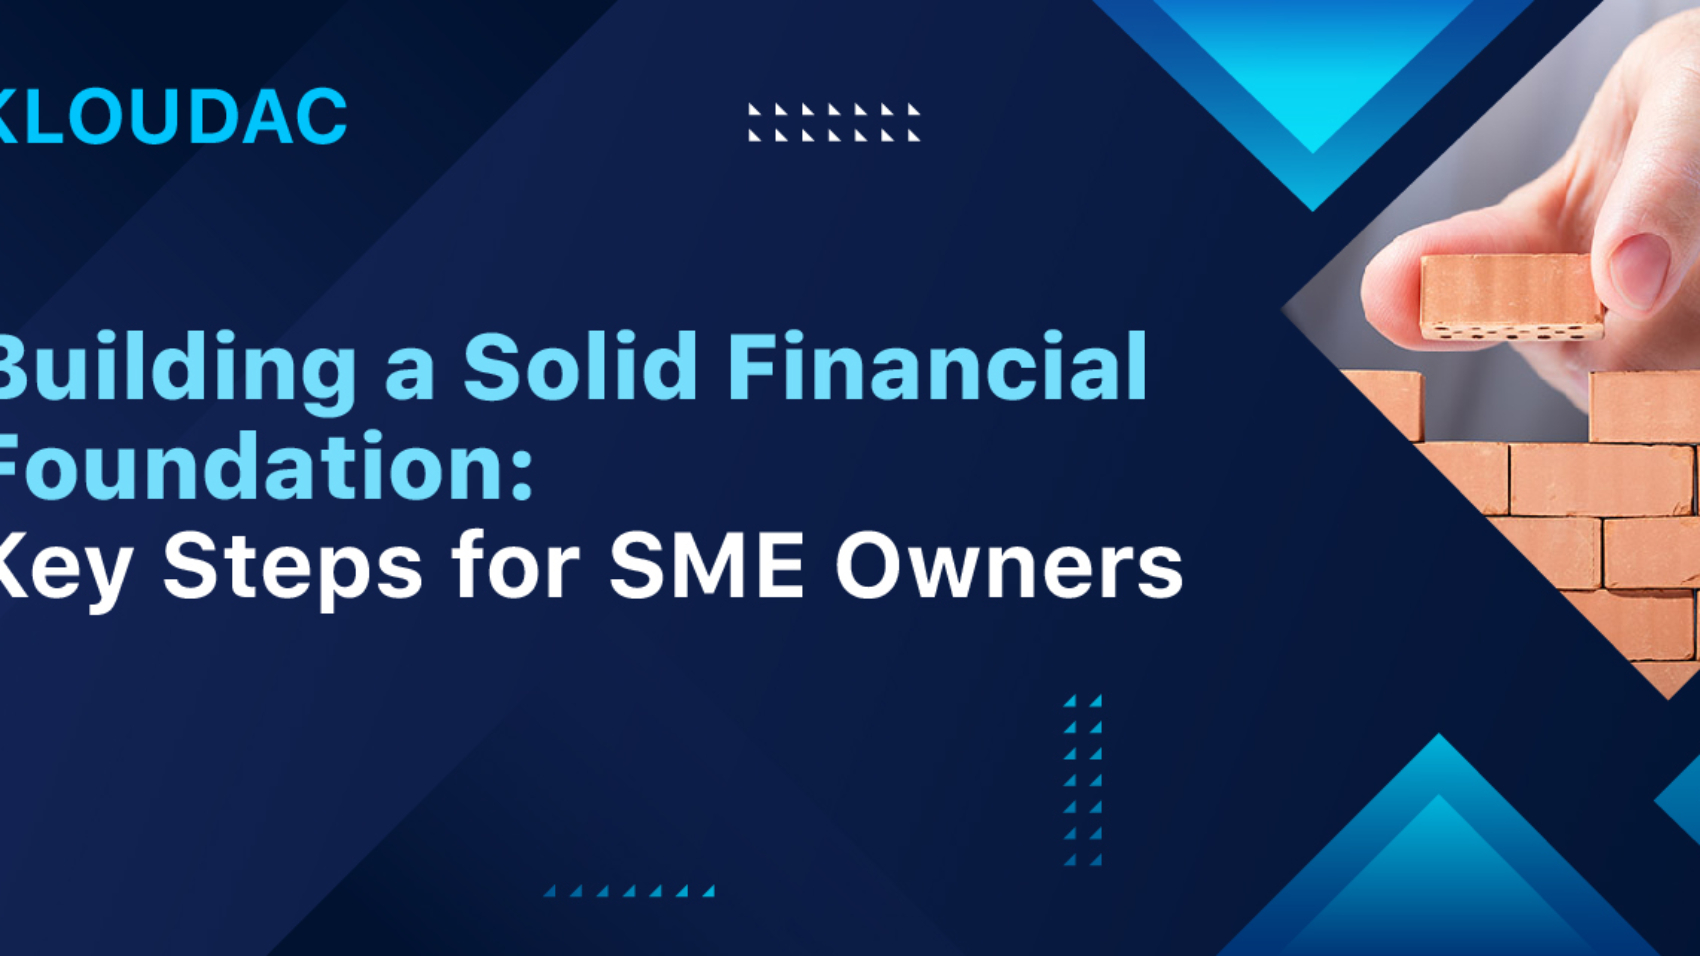 Building a Solid Financial Foundation: Key Steps for SME Owners